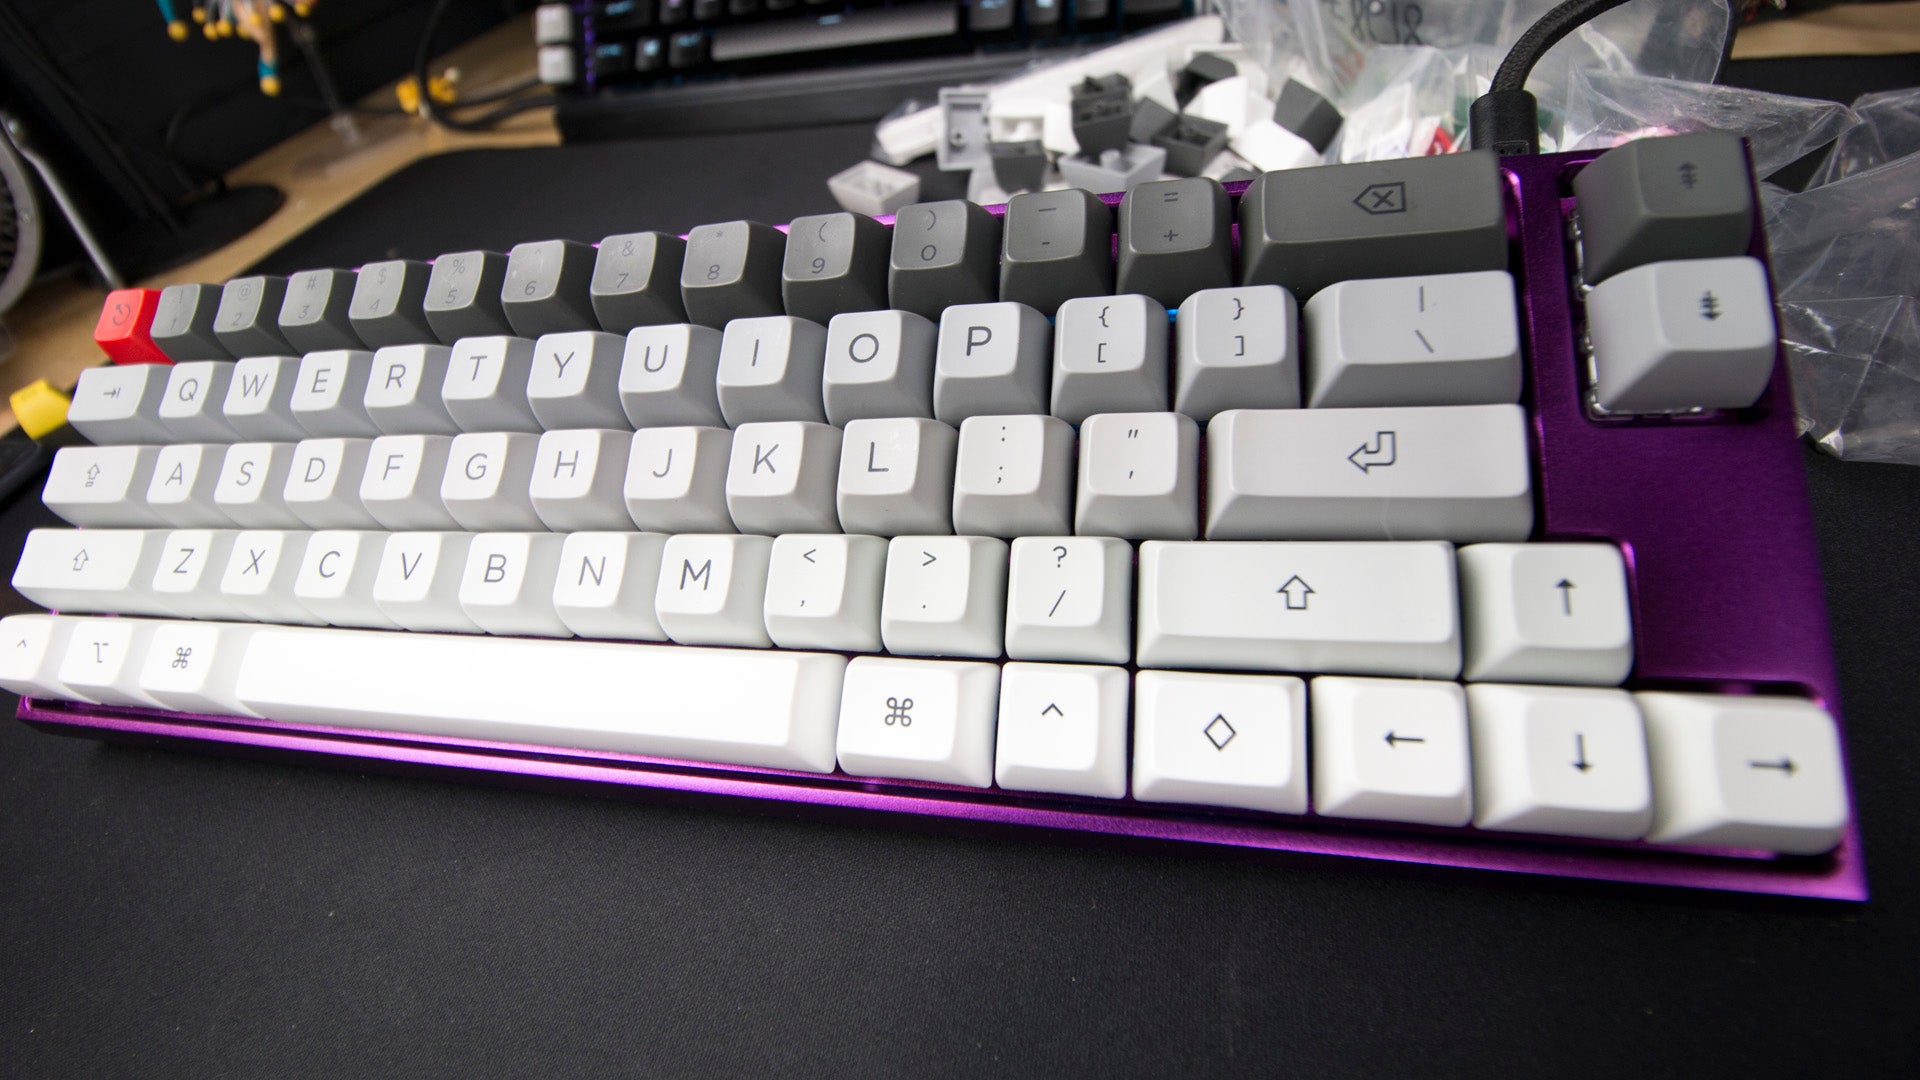 How To Build Your Own Keyboard